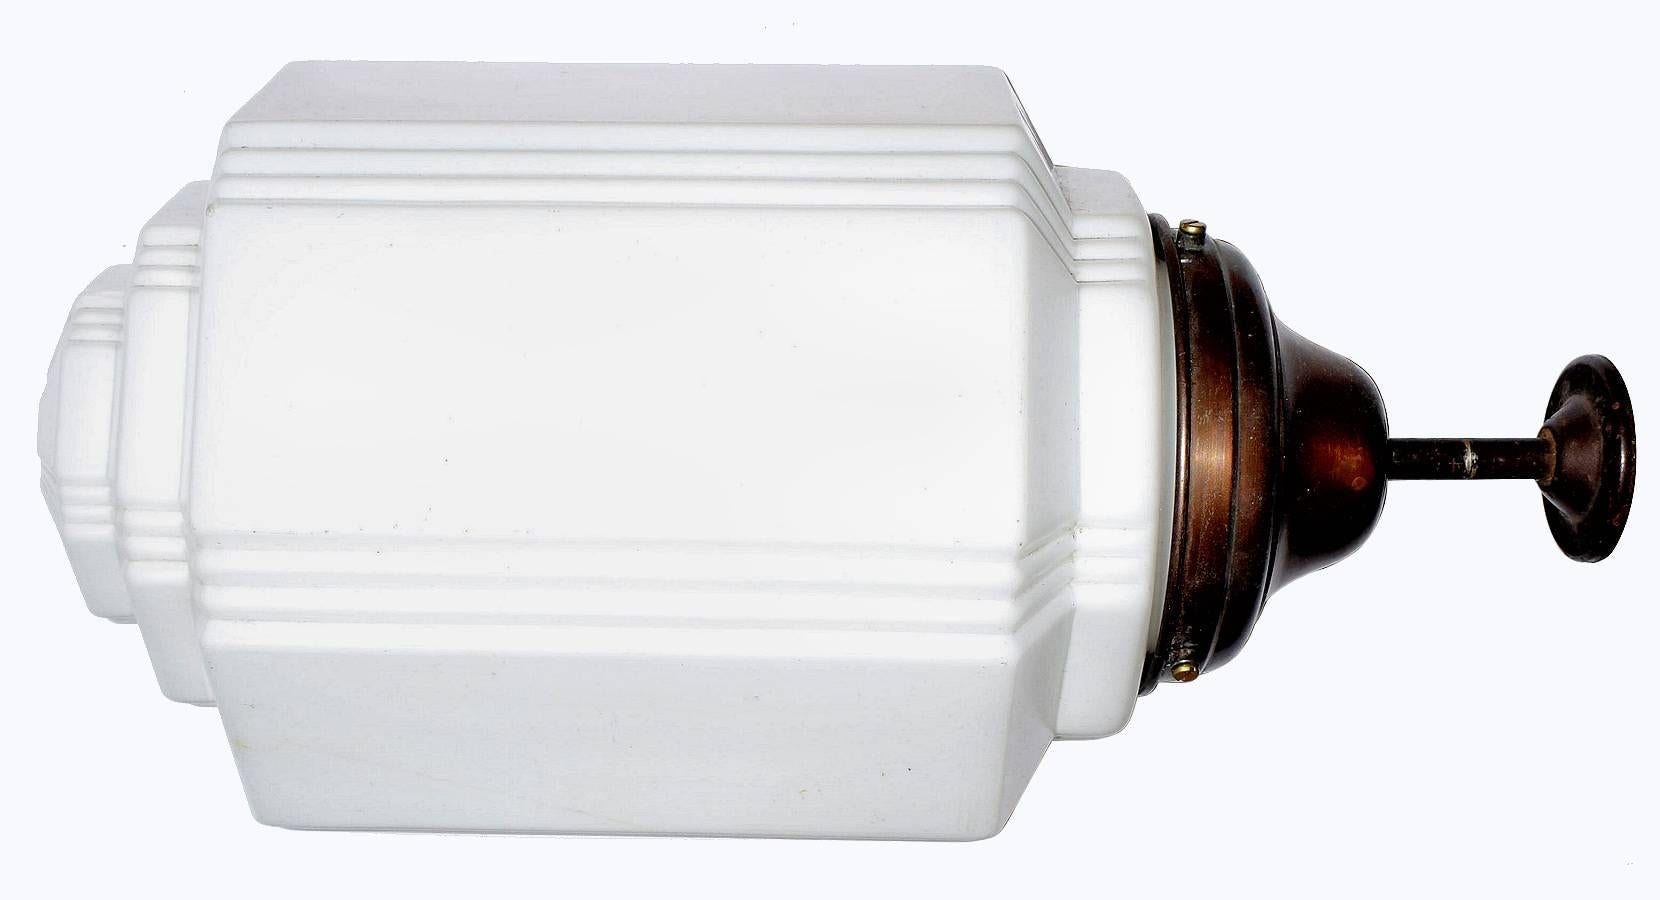 Stunning ceiling light in opaque white milk glass shade totally authentic and made in the mid-1930s. The shade is a wonderful size, impressively big making an imposing statement. The shape is reminiscent of a wedding cake, with it's stepped layers.